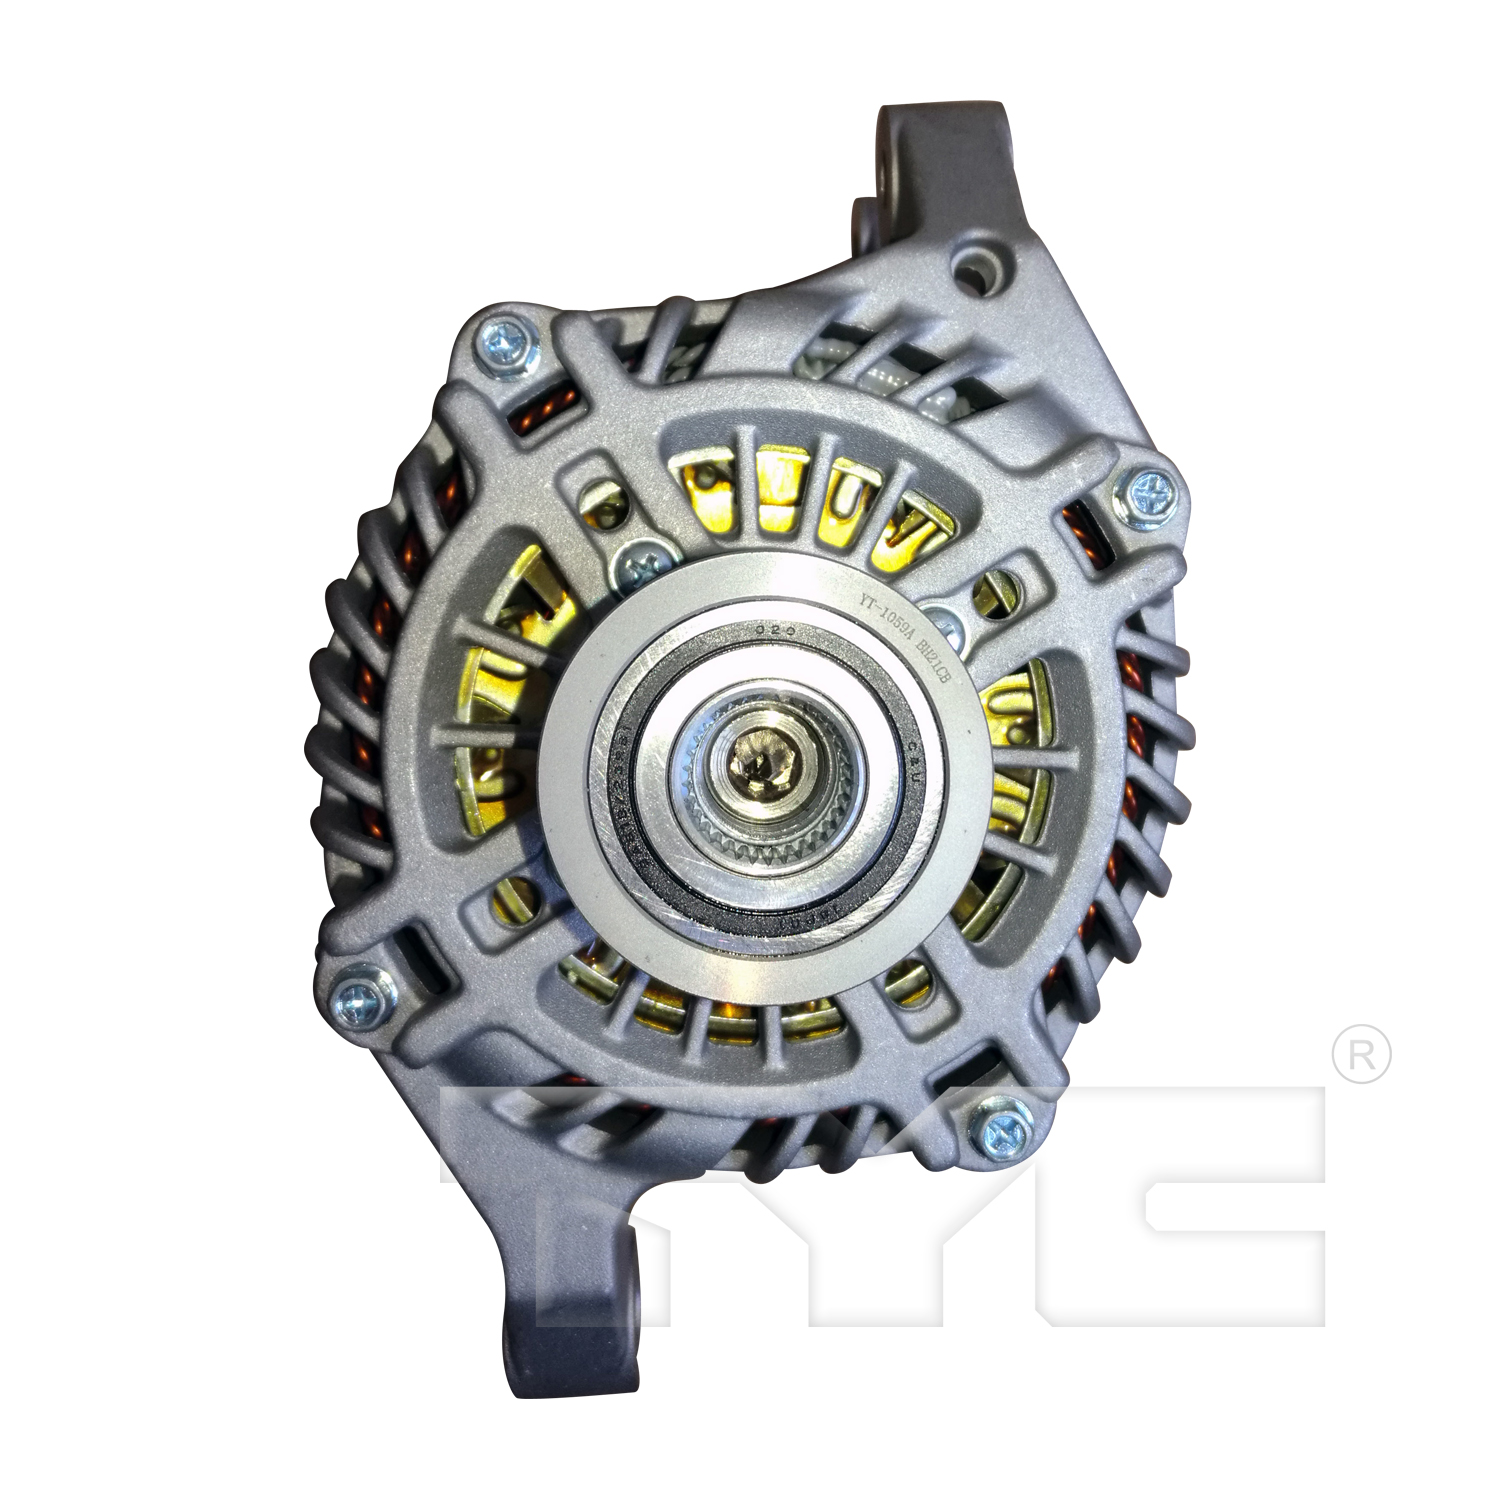 TYC-2-11668_NEW TYC ALTERNATOR 12V 150A FOR FORD FUSION APPLICATIONS